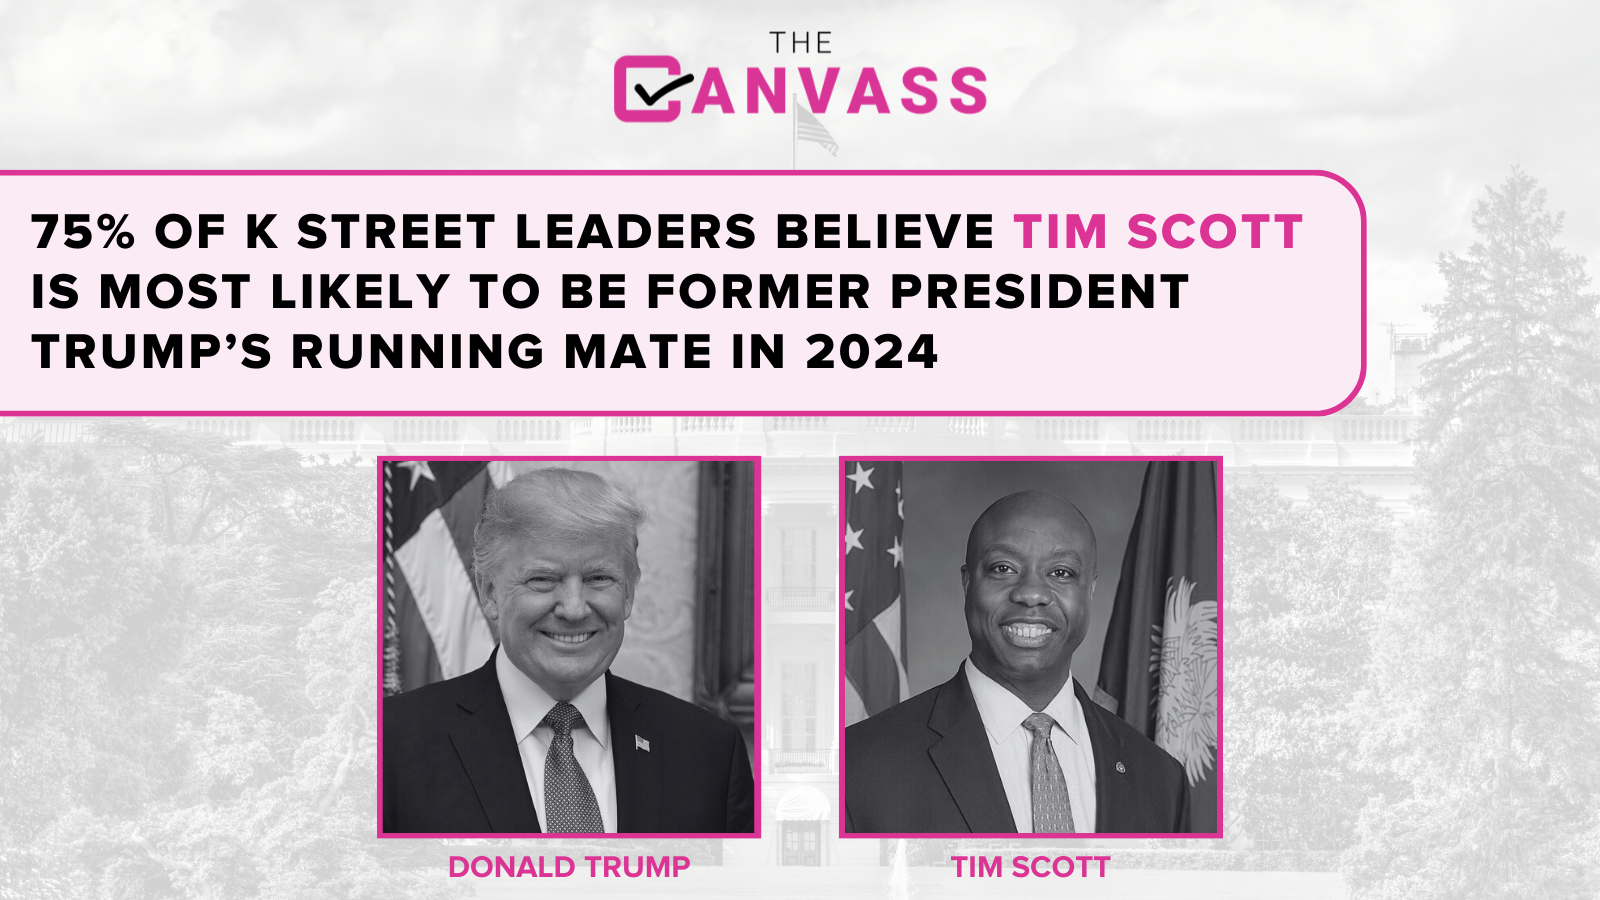 A growing number of K Street leaders (75%) believe Sen. Tim Scott will be Donald Trump’s running mate this presidential election.